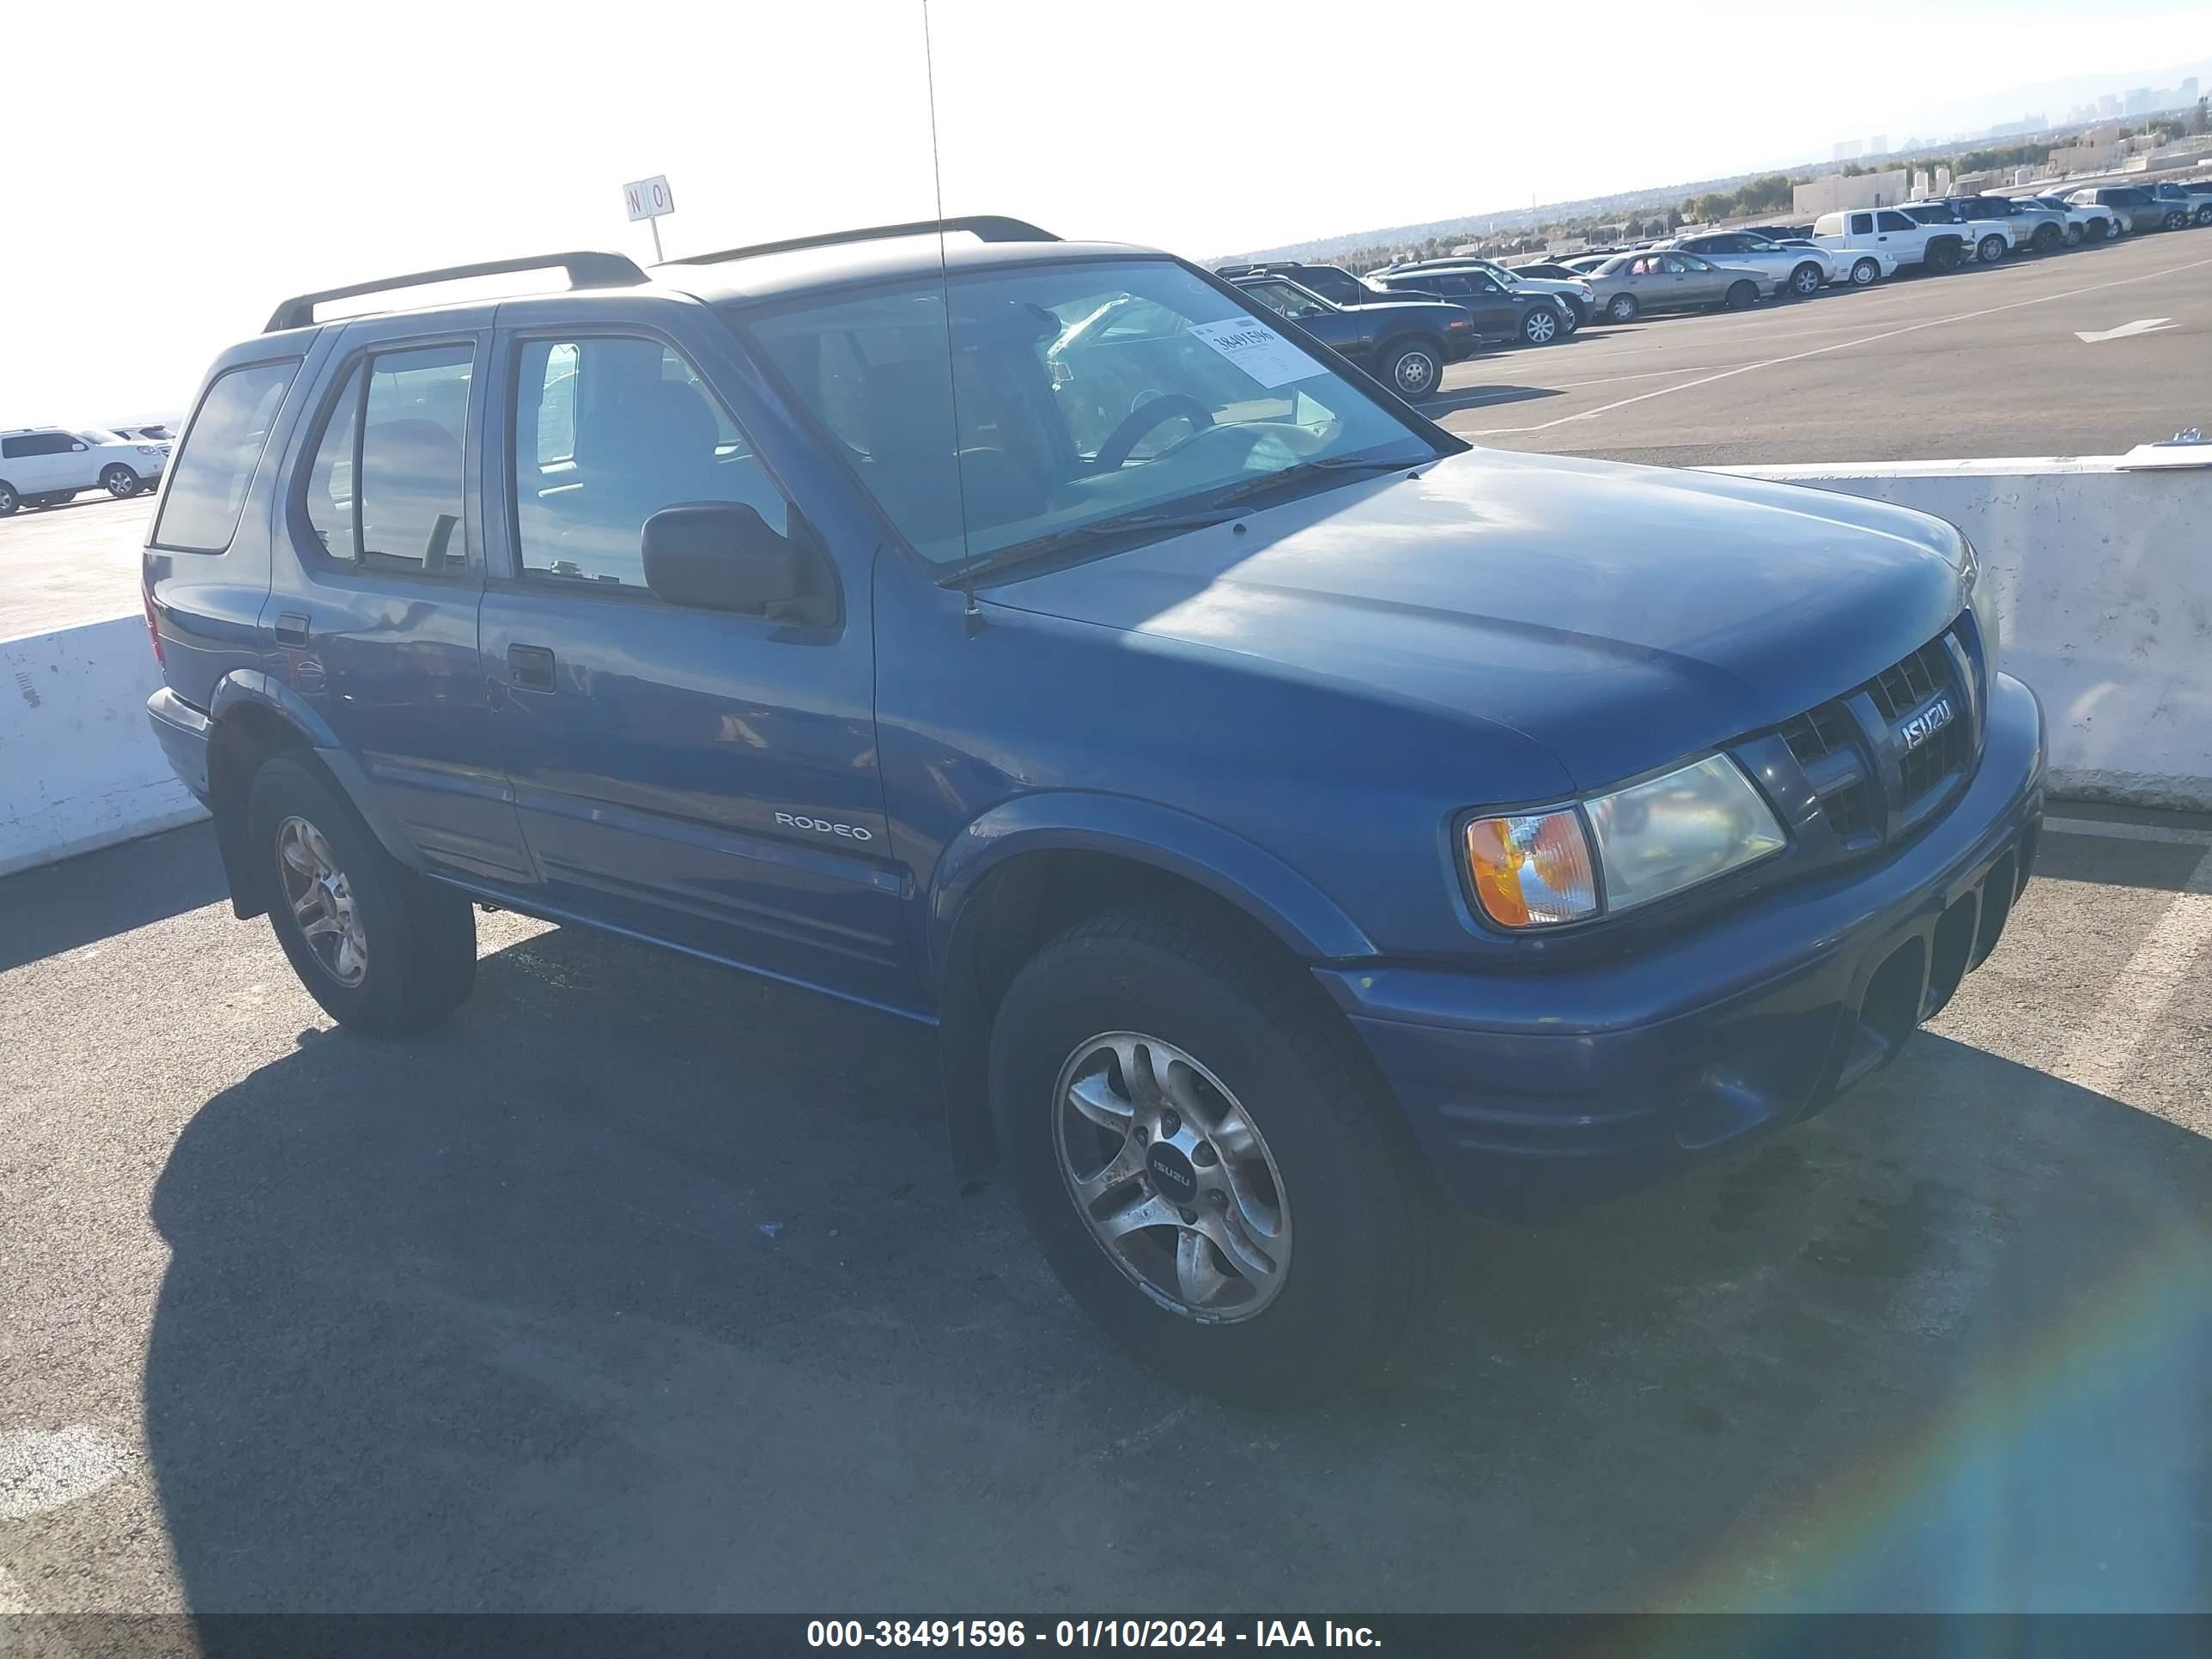 vin: 4S2CK58W344316315 4S2CK58W344316315 2004 isuzu rodeo 3200 for Sale in 89122, 3225 South Hollywood Blvd, Las Vegas, Nevada, USA